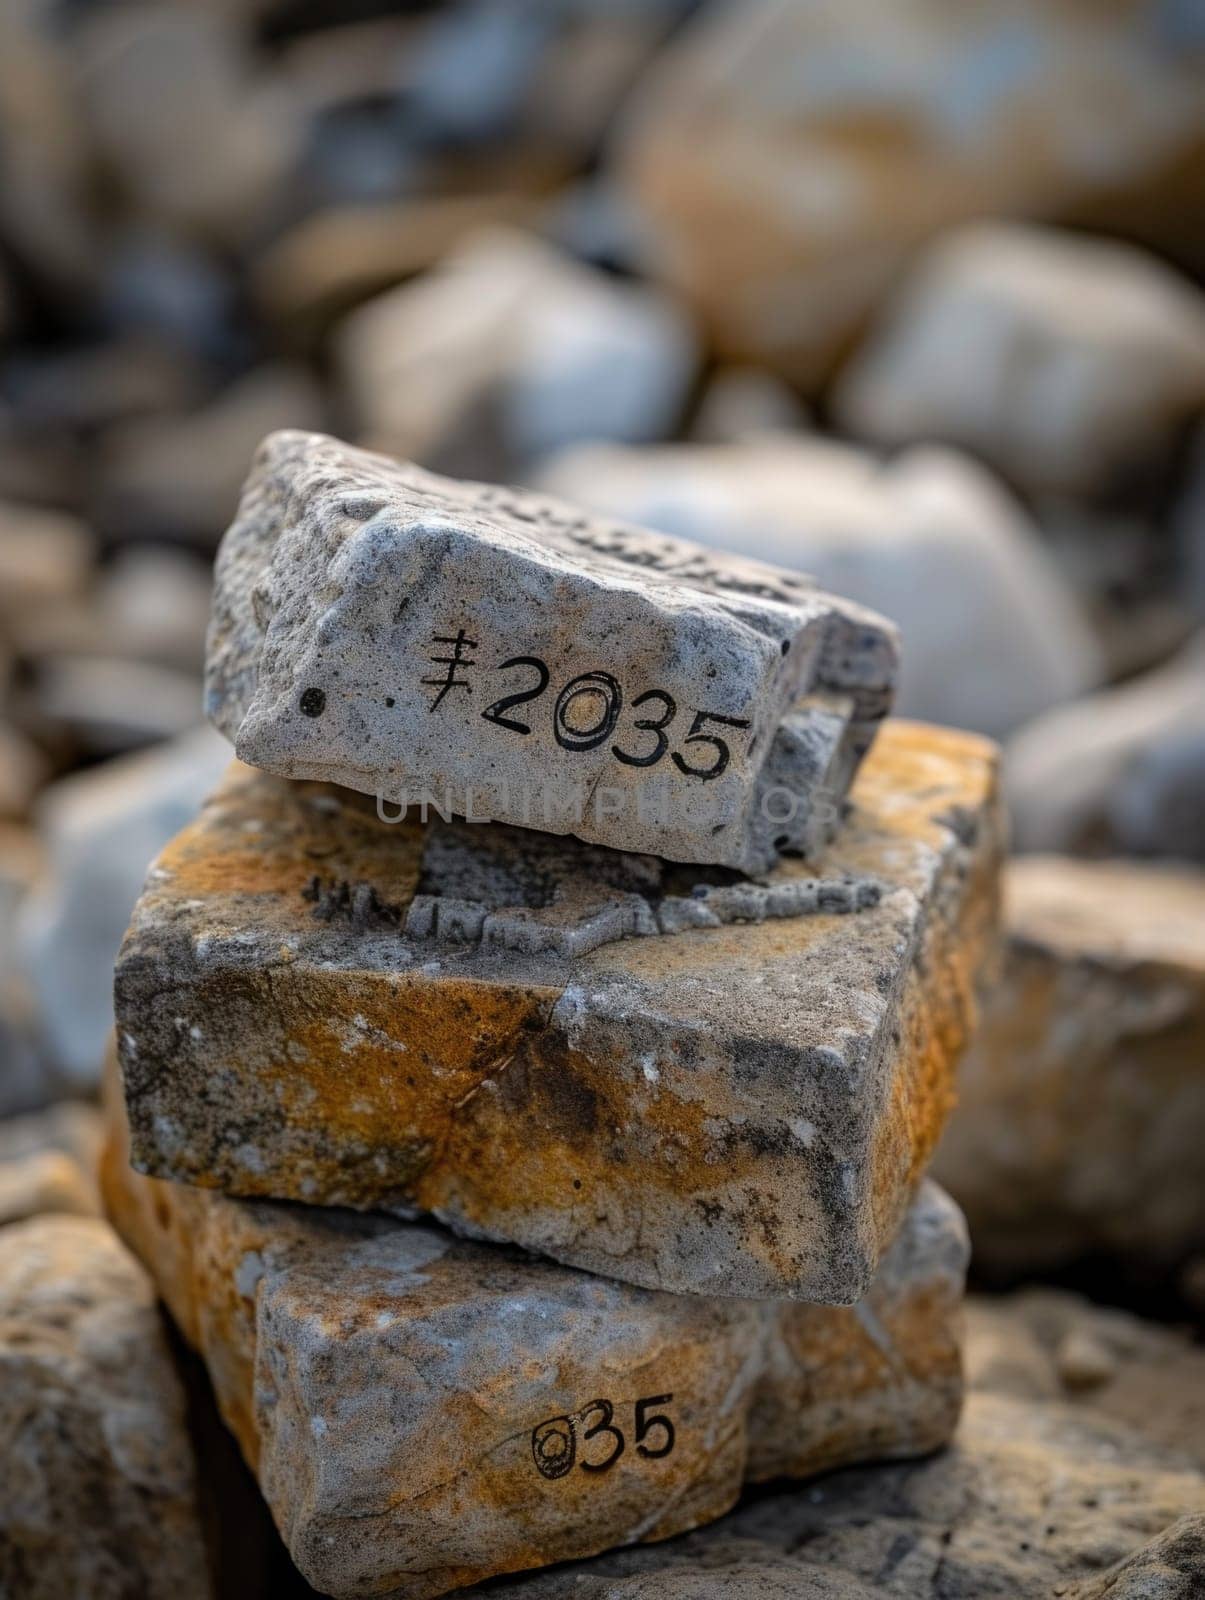 A collection of rocks arranged in a stack, with the number 205 inscribed on them.